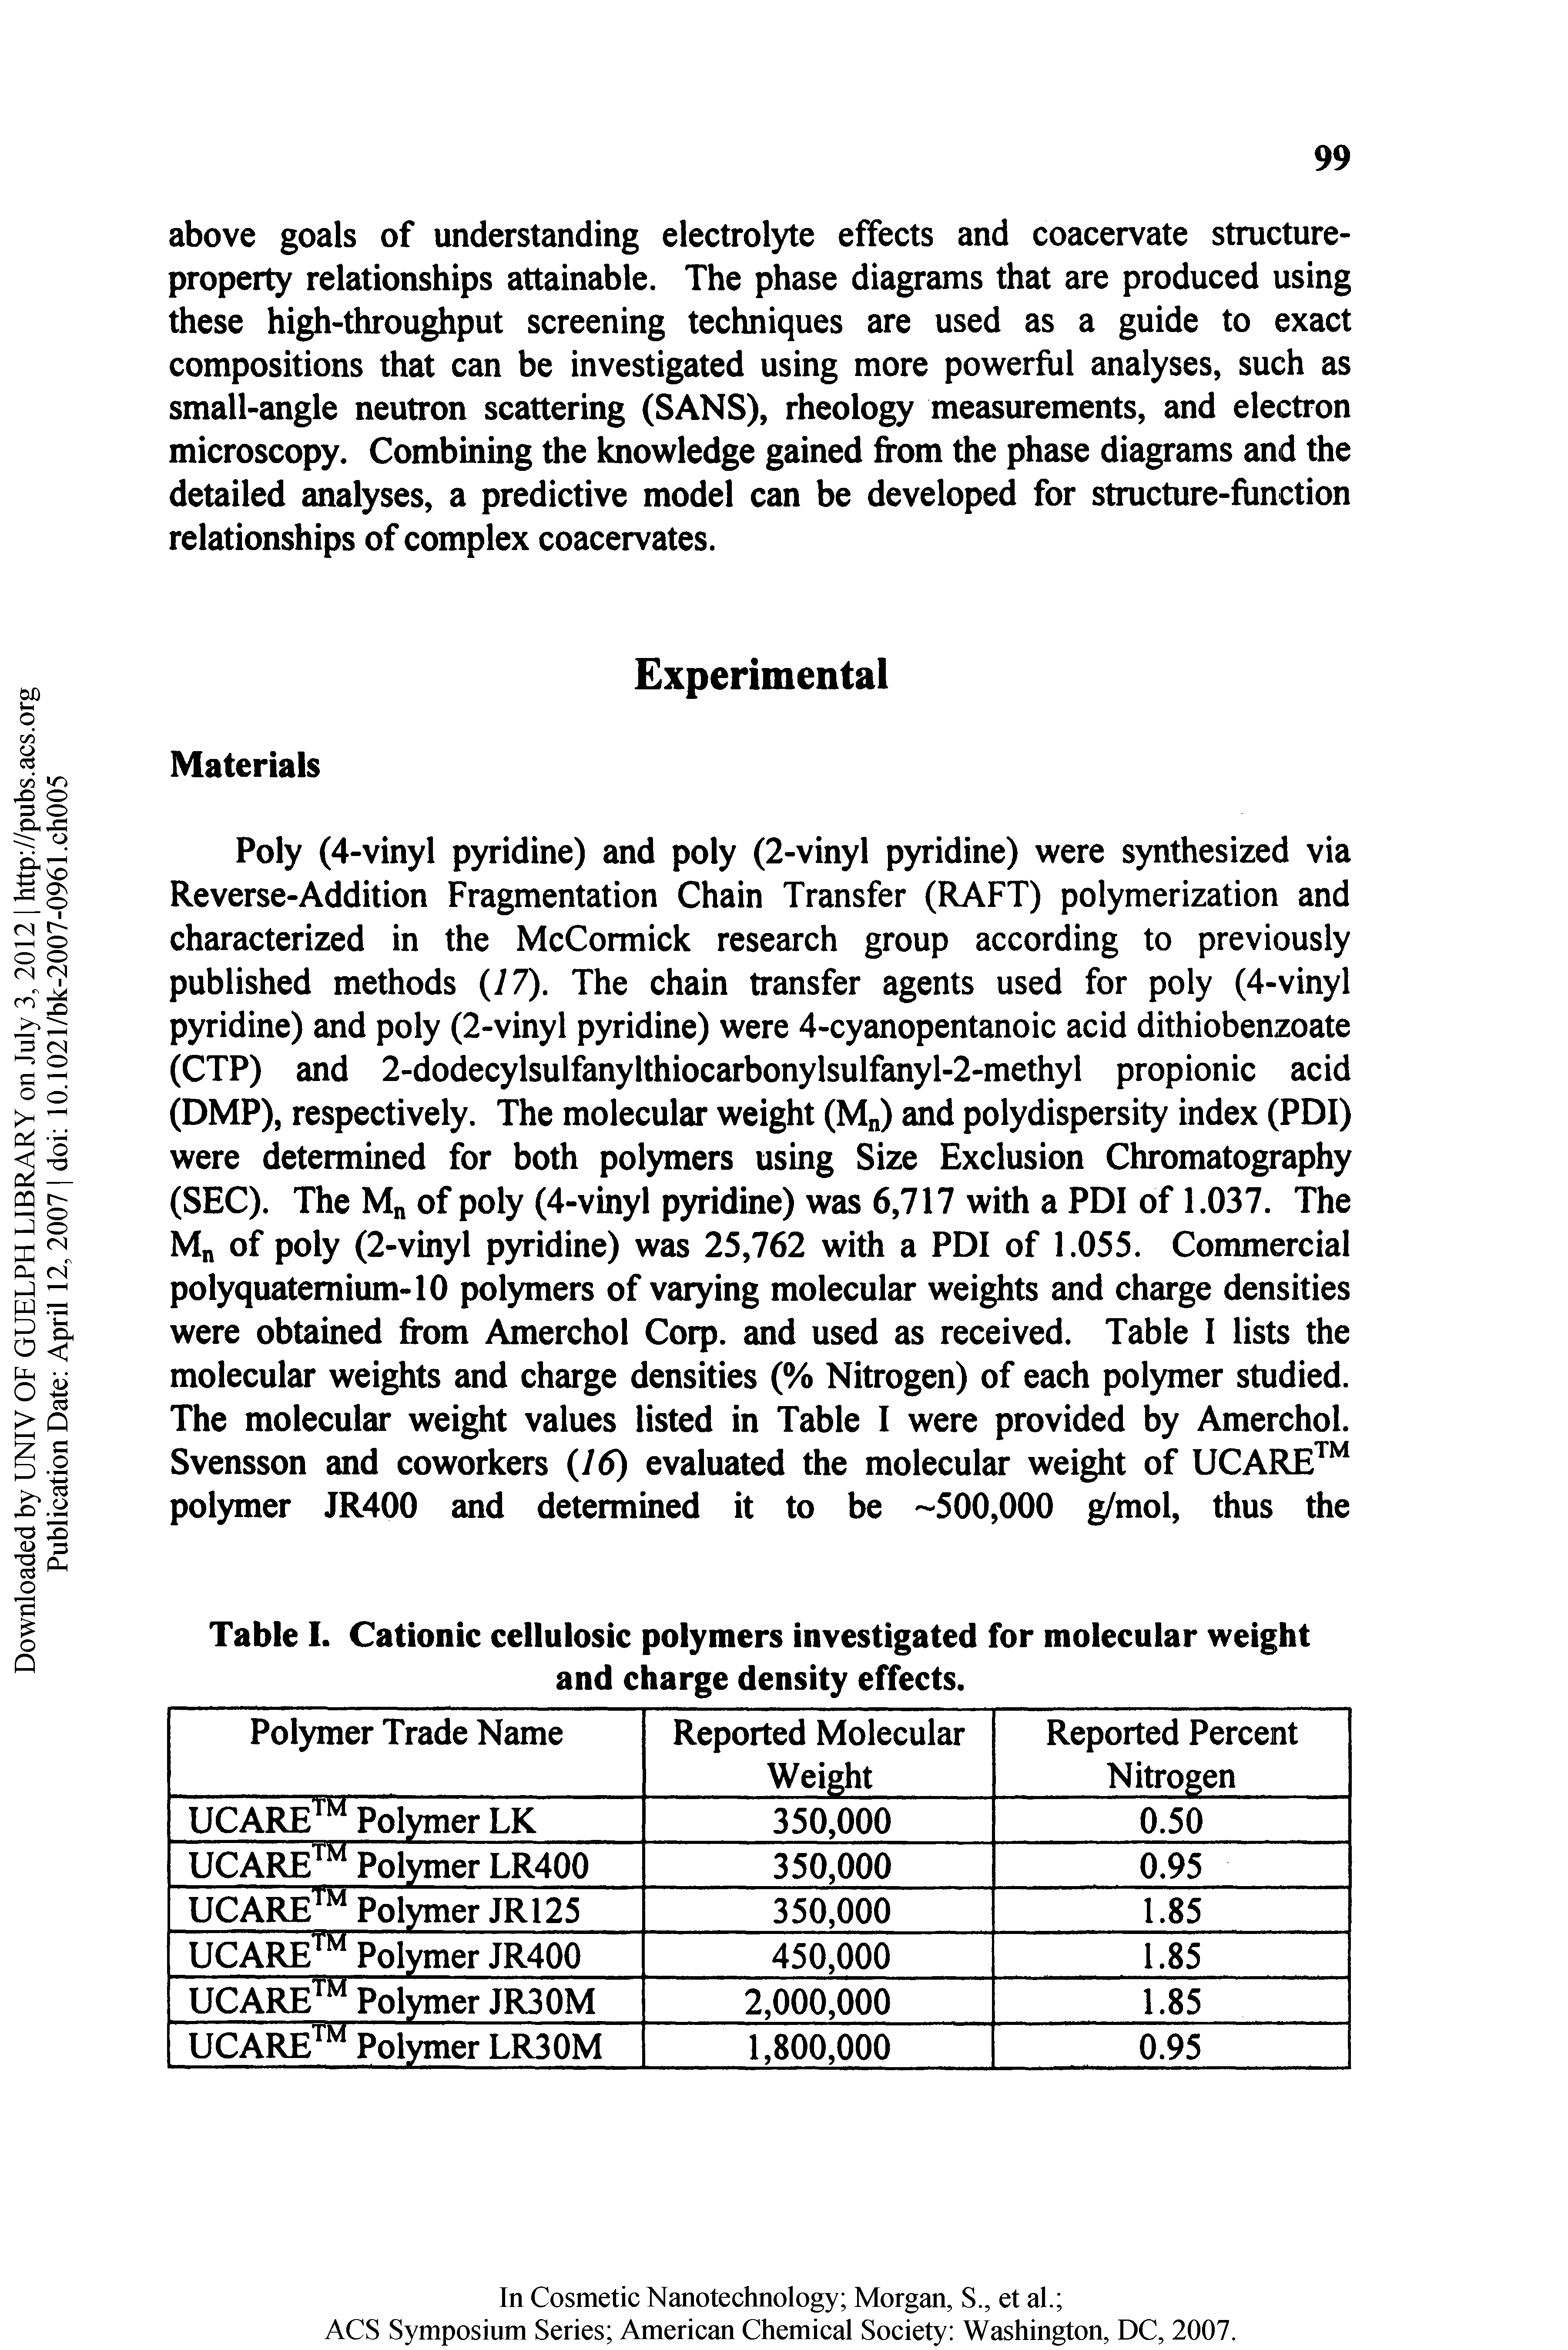 Table I. Cationic celluloslc polymers investigated for molecular weight and charge density effects.